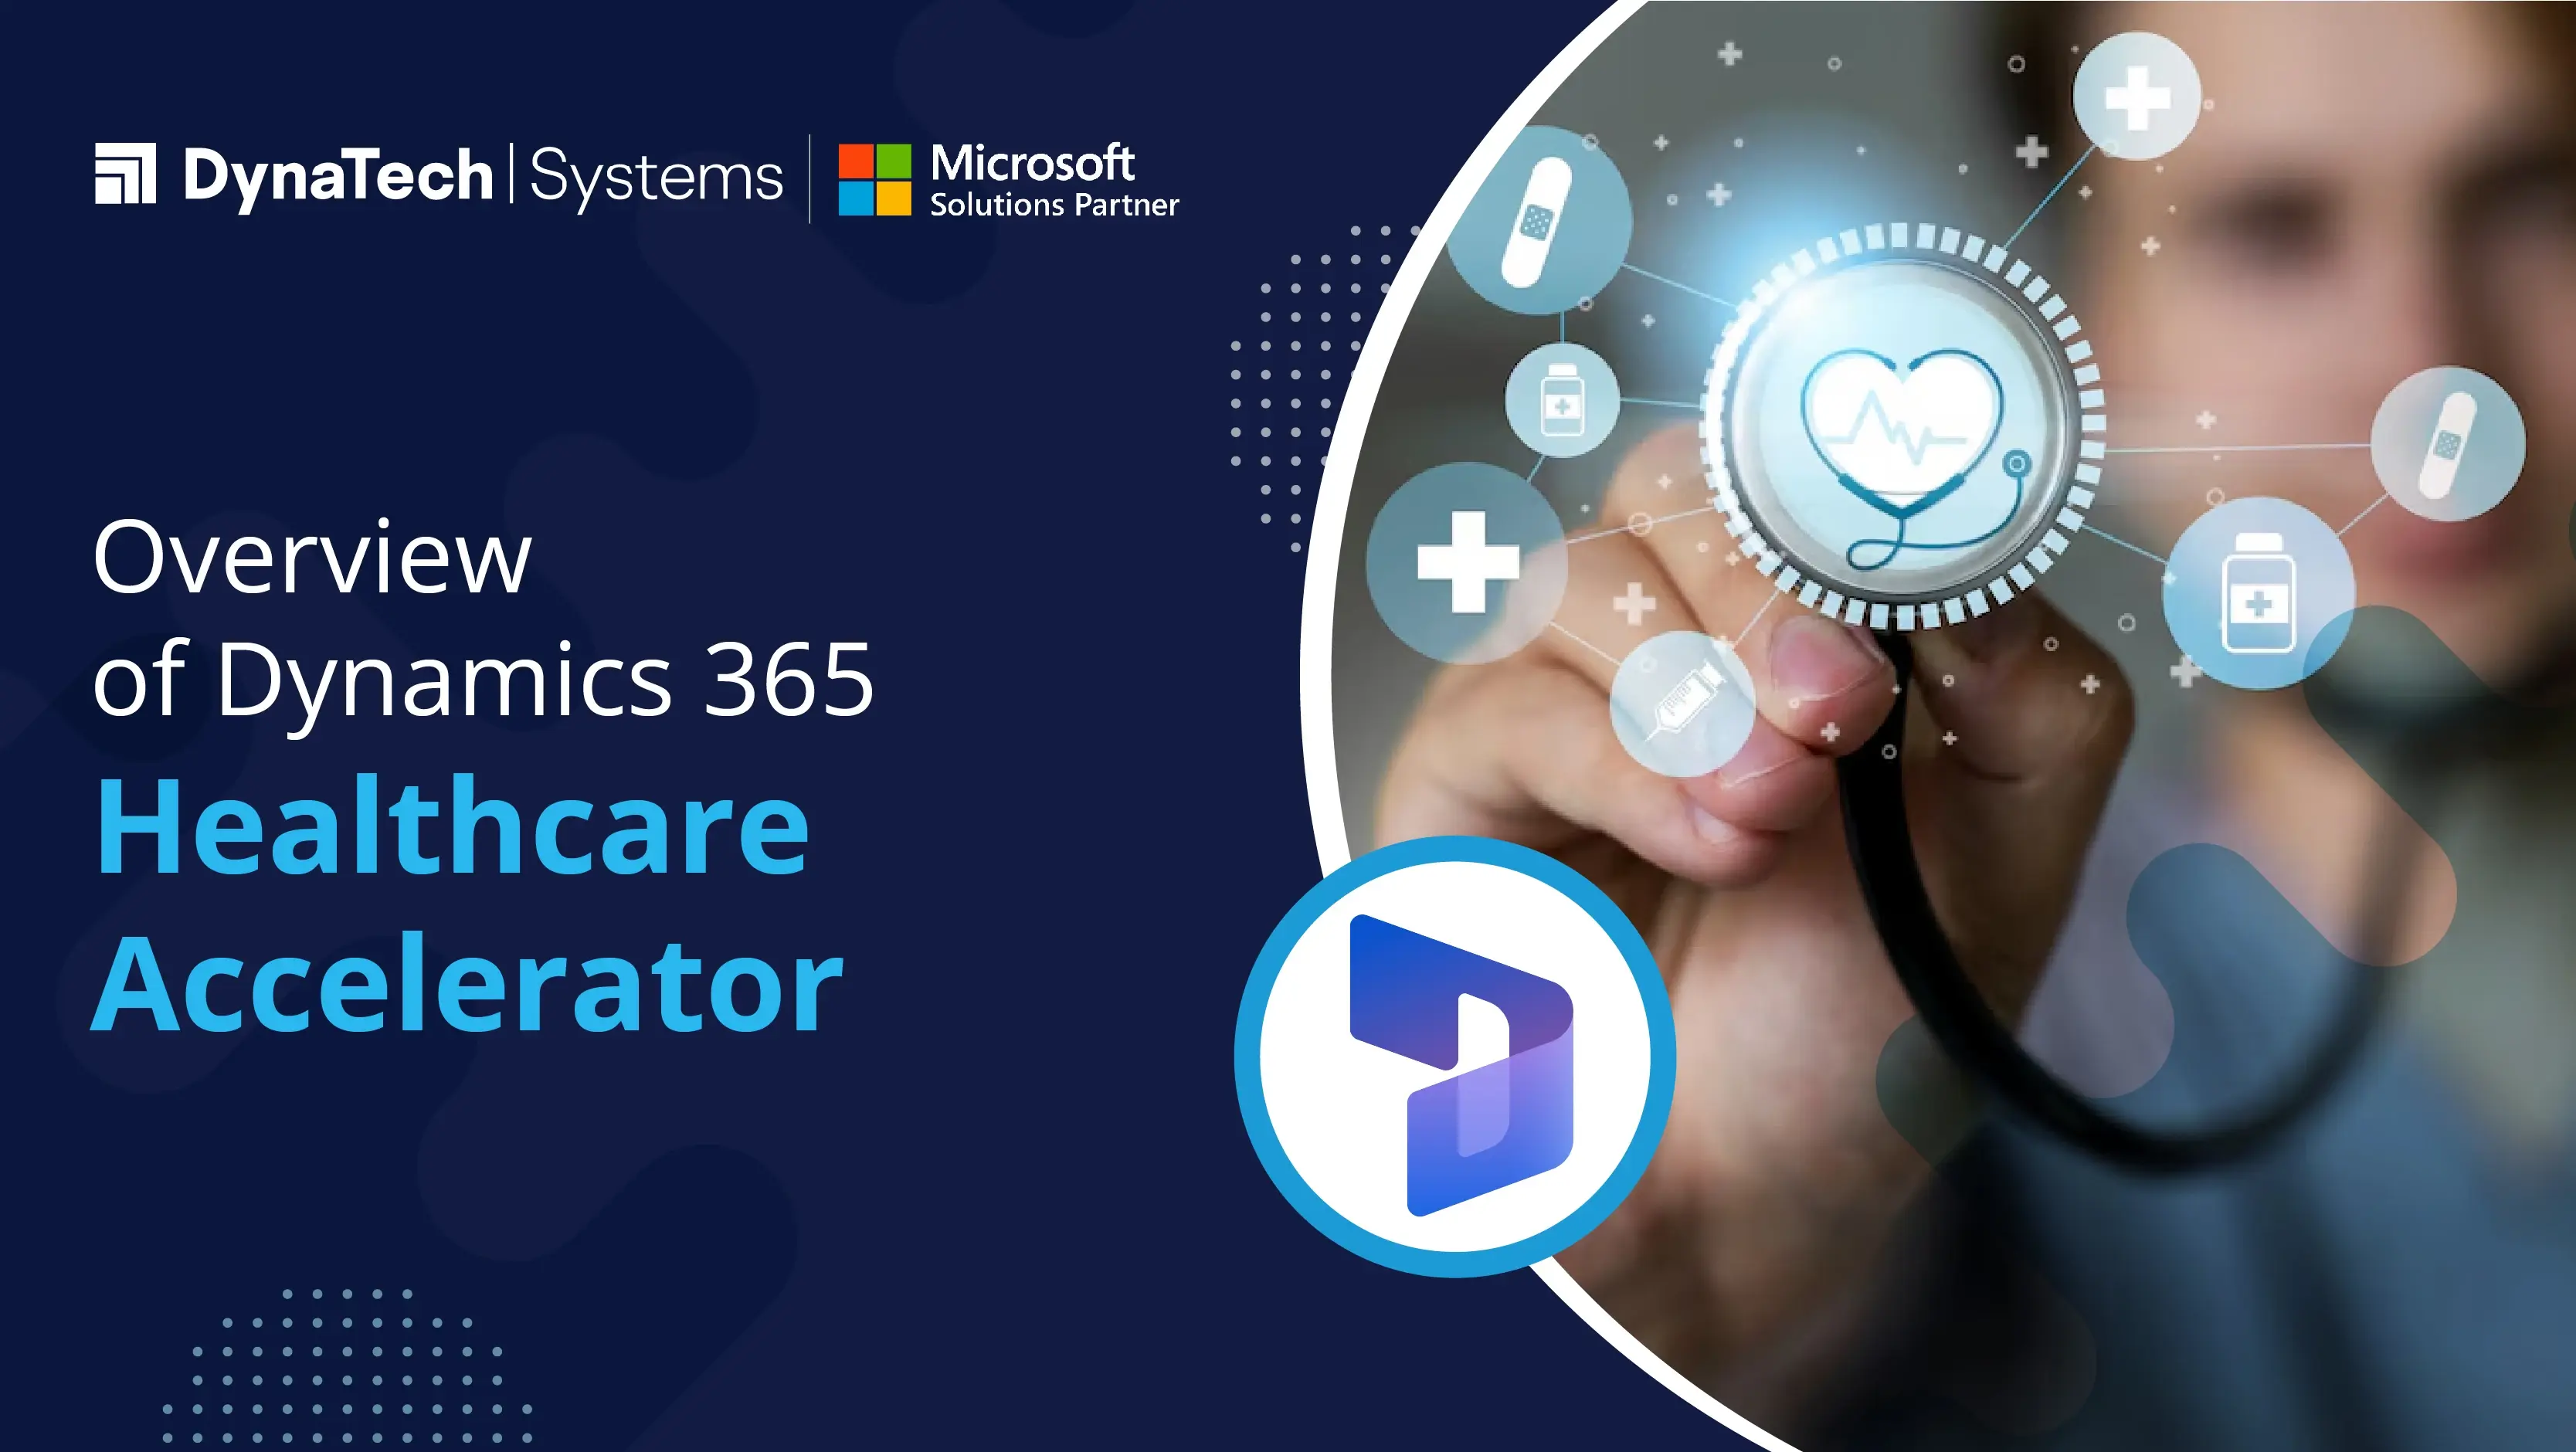 Overview of Dynamics 365 Healthcare Accelerator